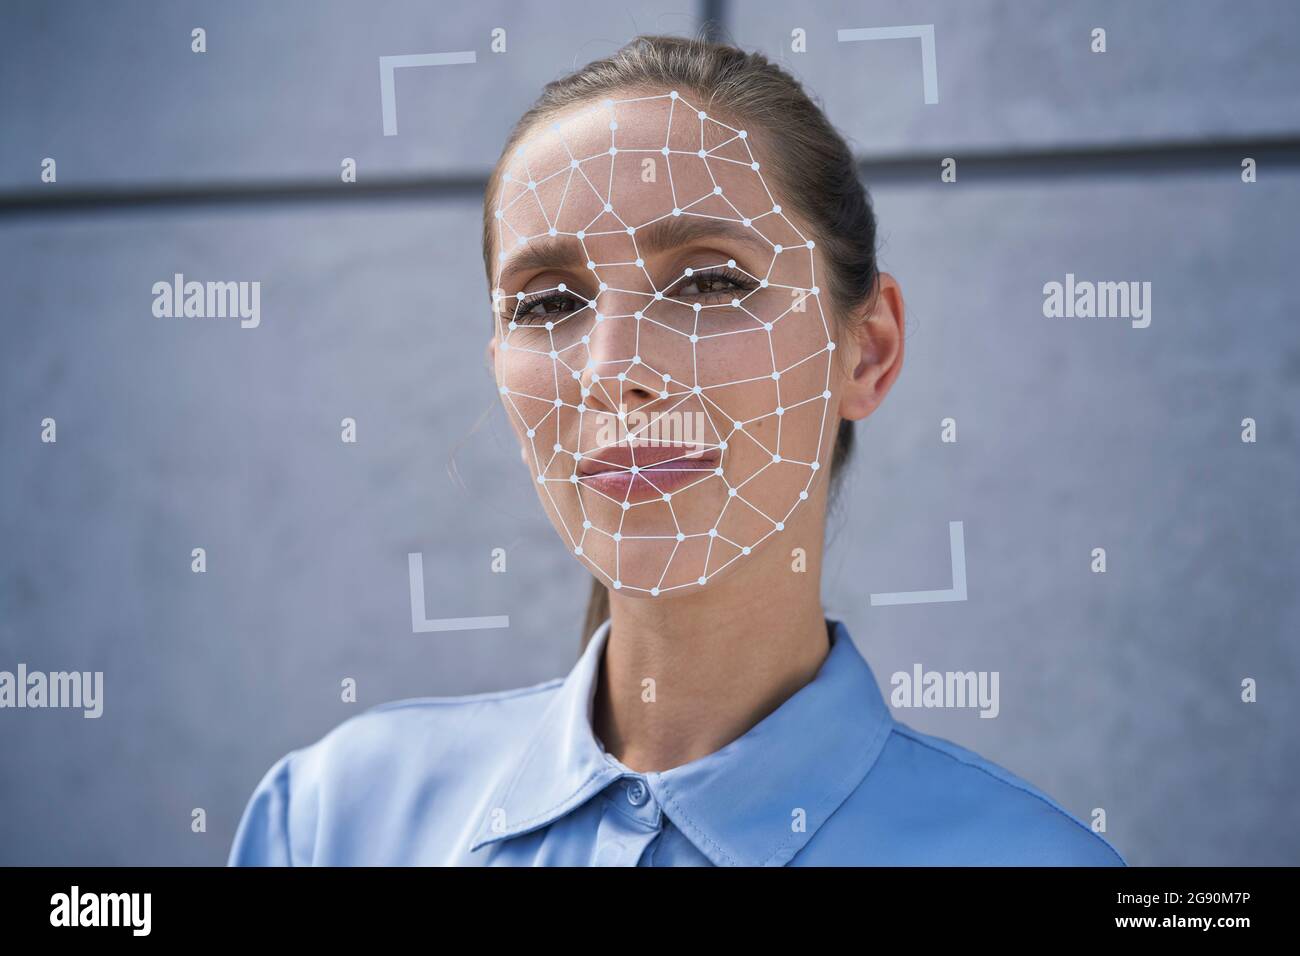 Businesswoman with facial recognition biometrics in front of wall Stock Photo